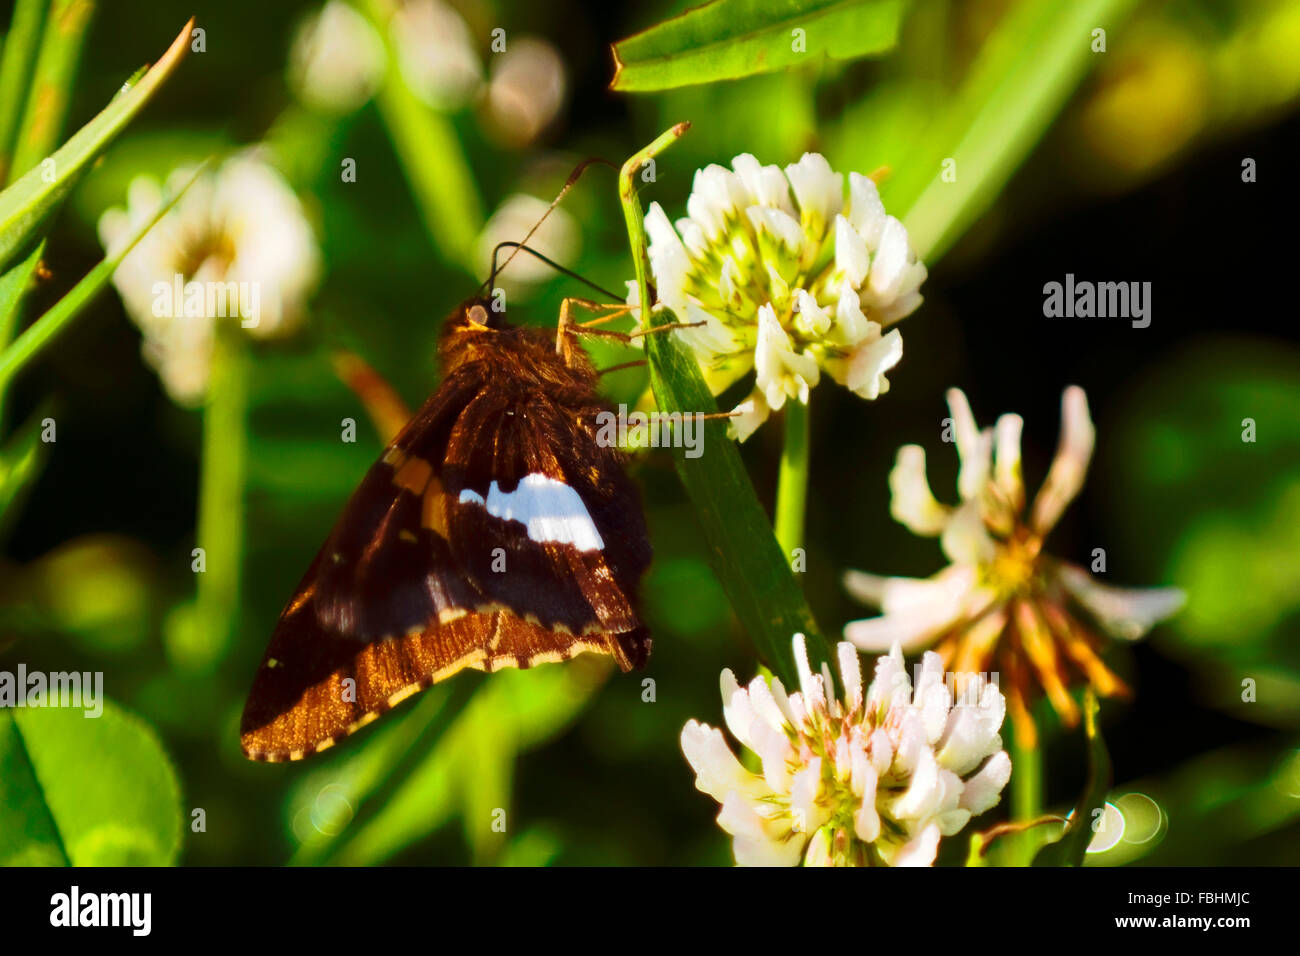 A brown and white butterfly feeding from the nectar of a white clover flower. Stock Photo